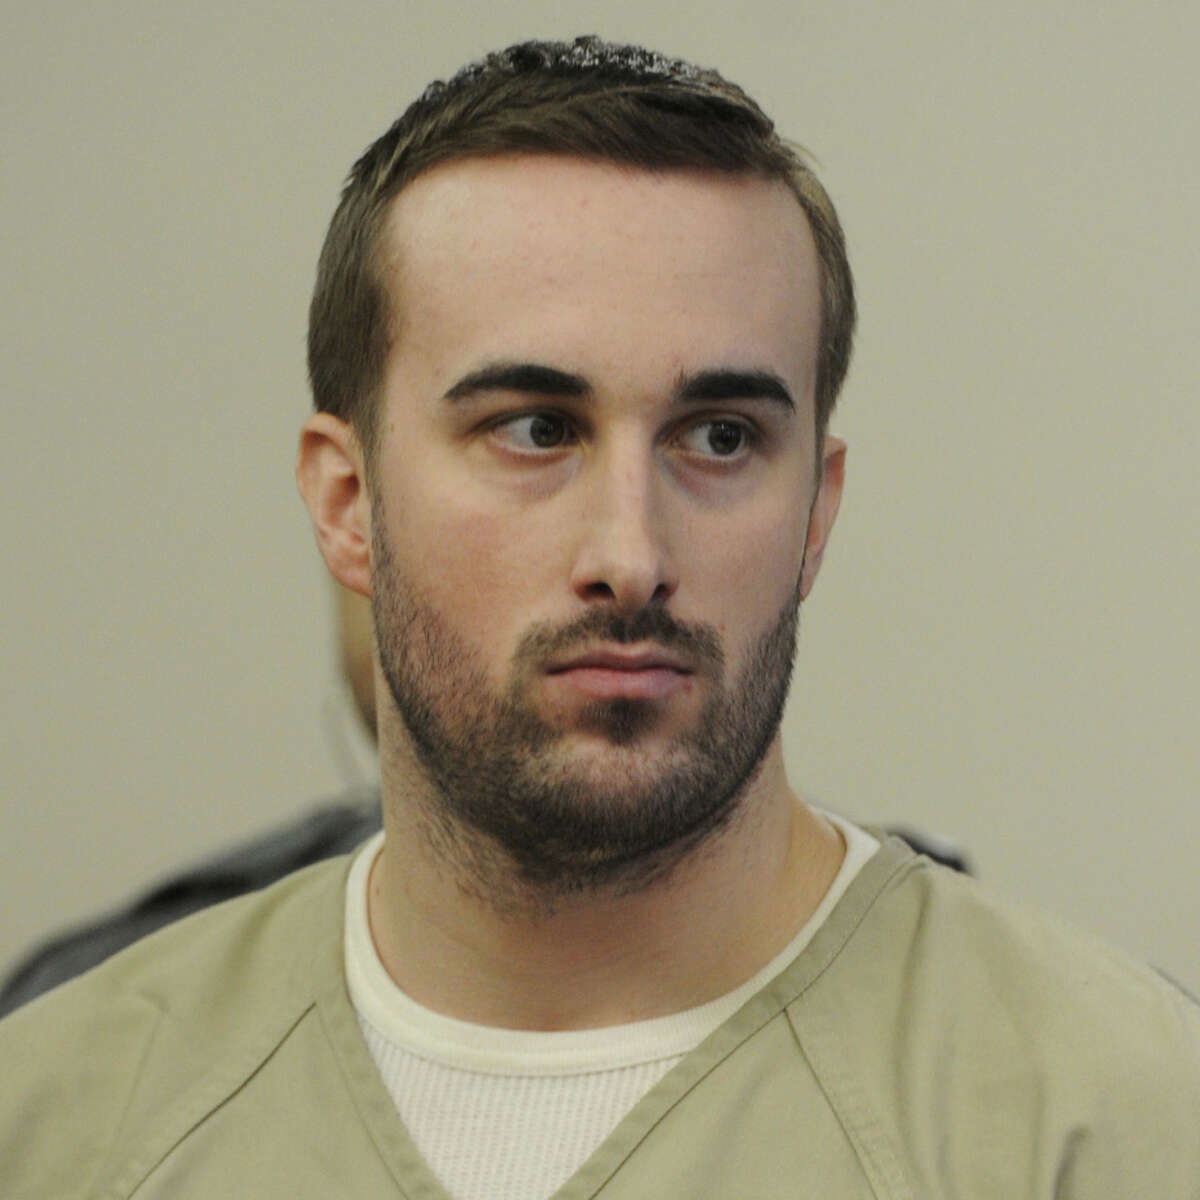 Kyle Navin, the former Easton man who allegedly separately shot his parents to death and buried their bodies in Weston, Conn. Judge Robert Devlin denied for now the motion for Kyle Navin to submit to new fingerprinting.